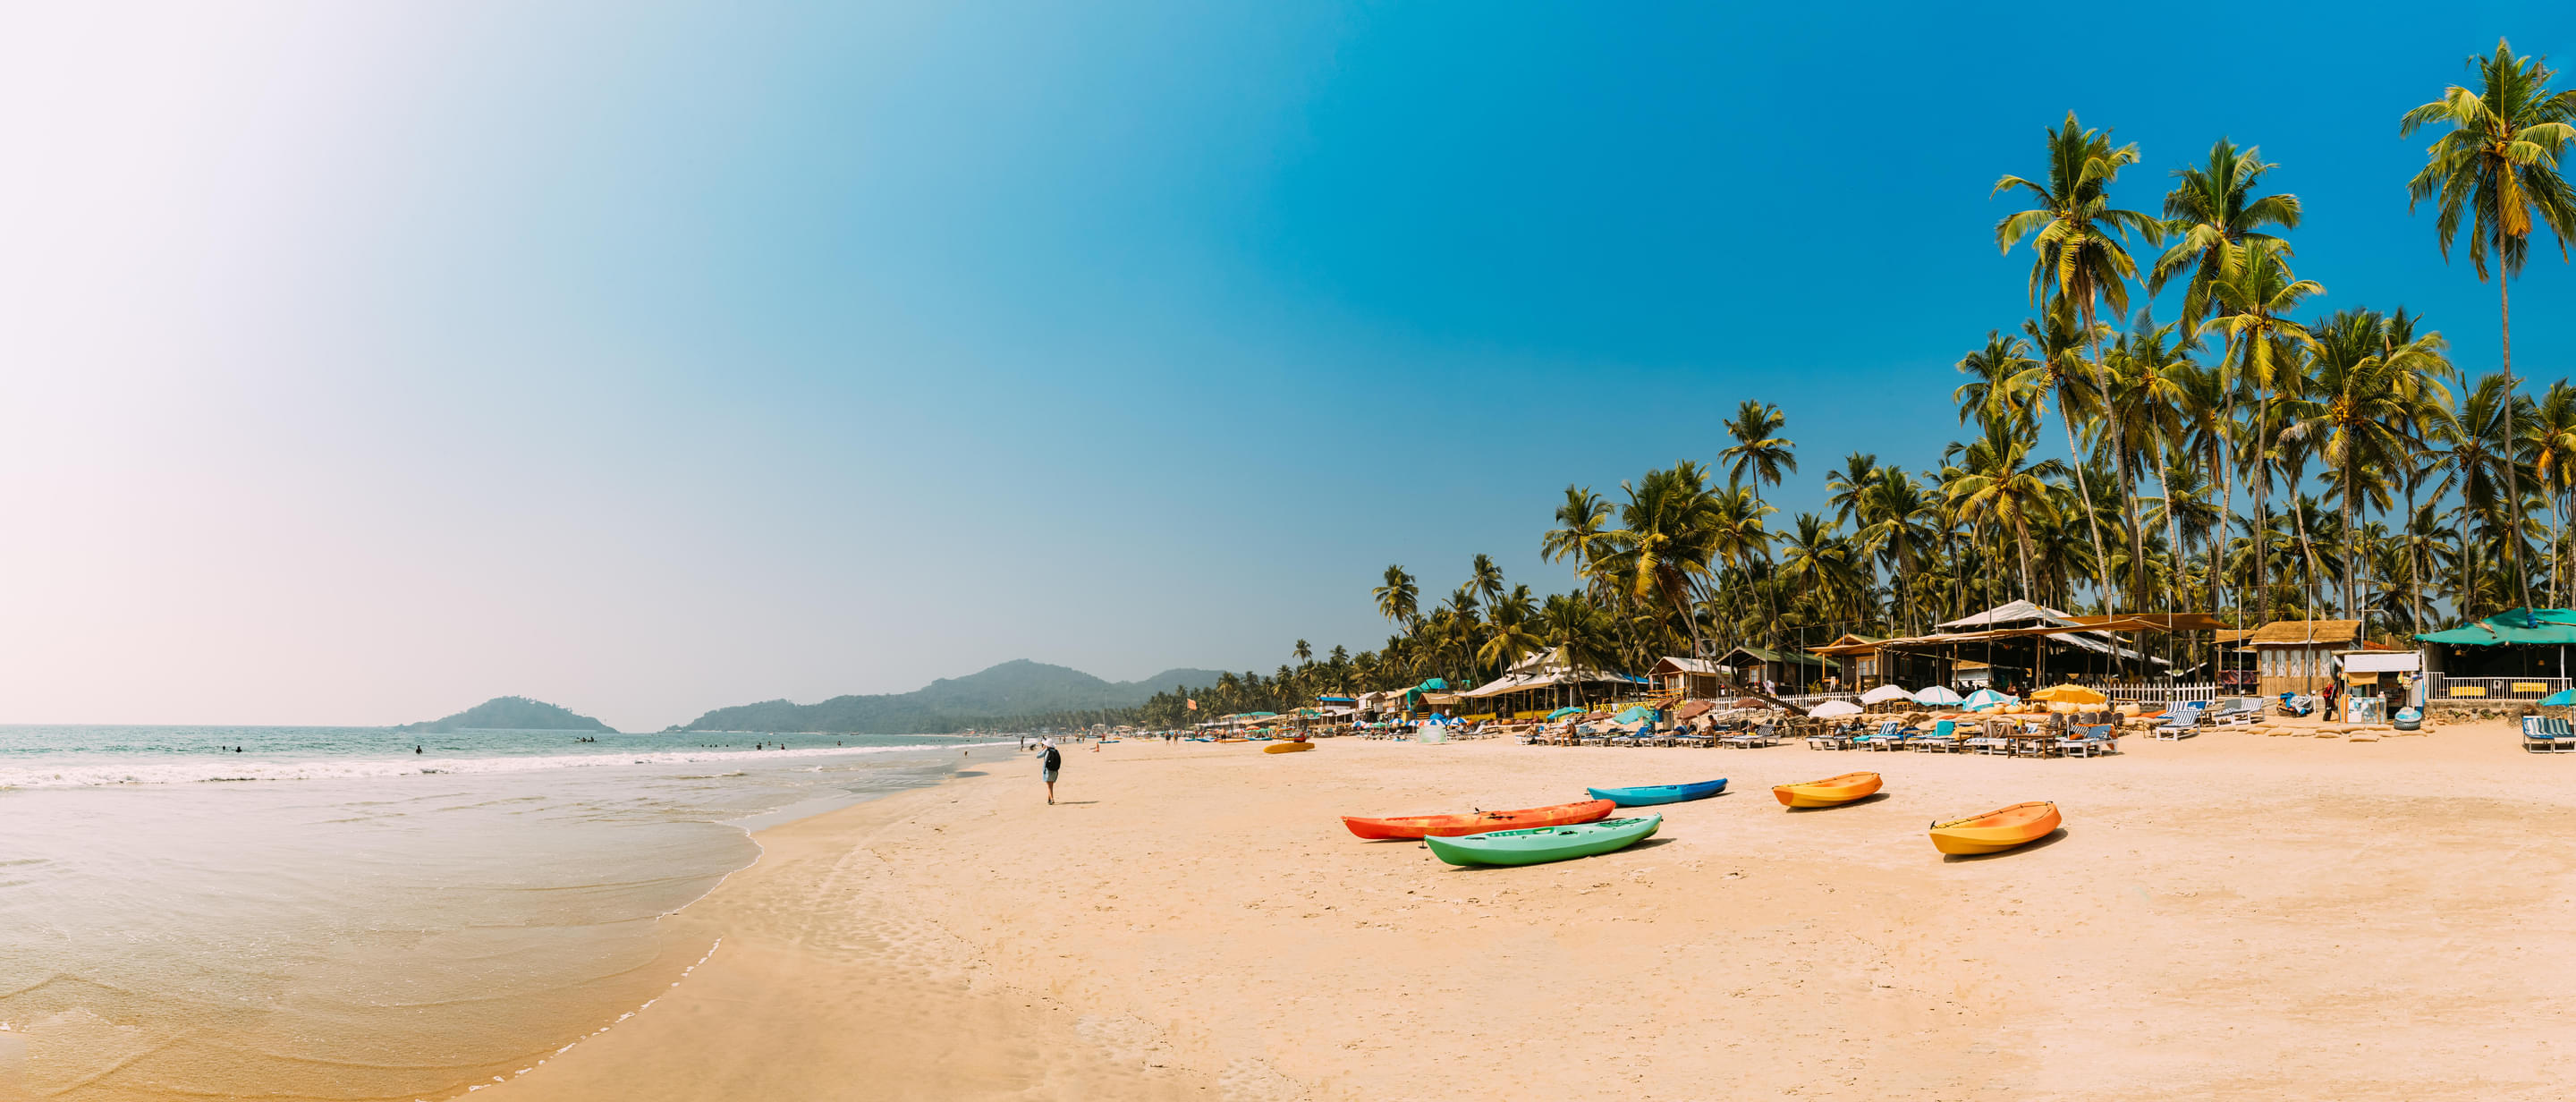 Rentals and Sightseeing Tours in Goa